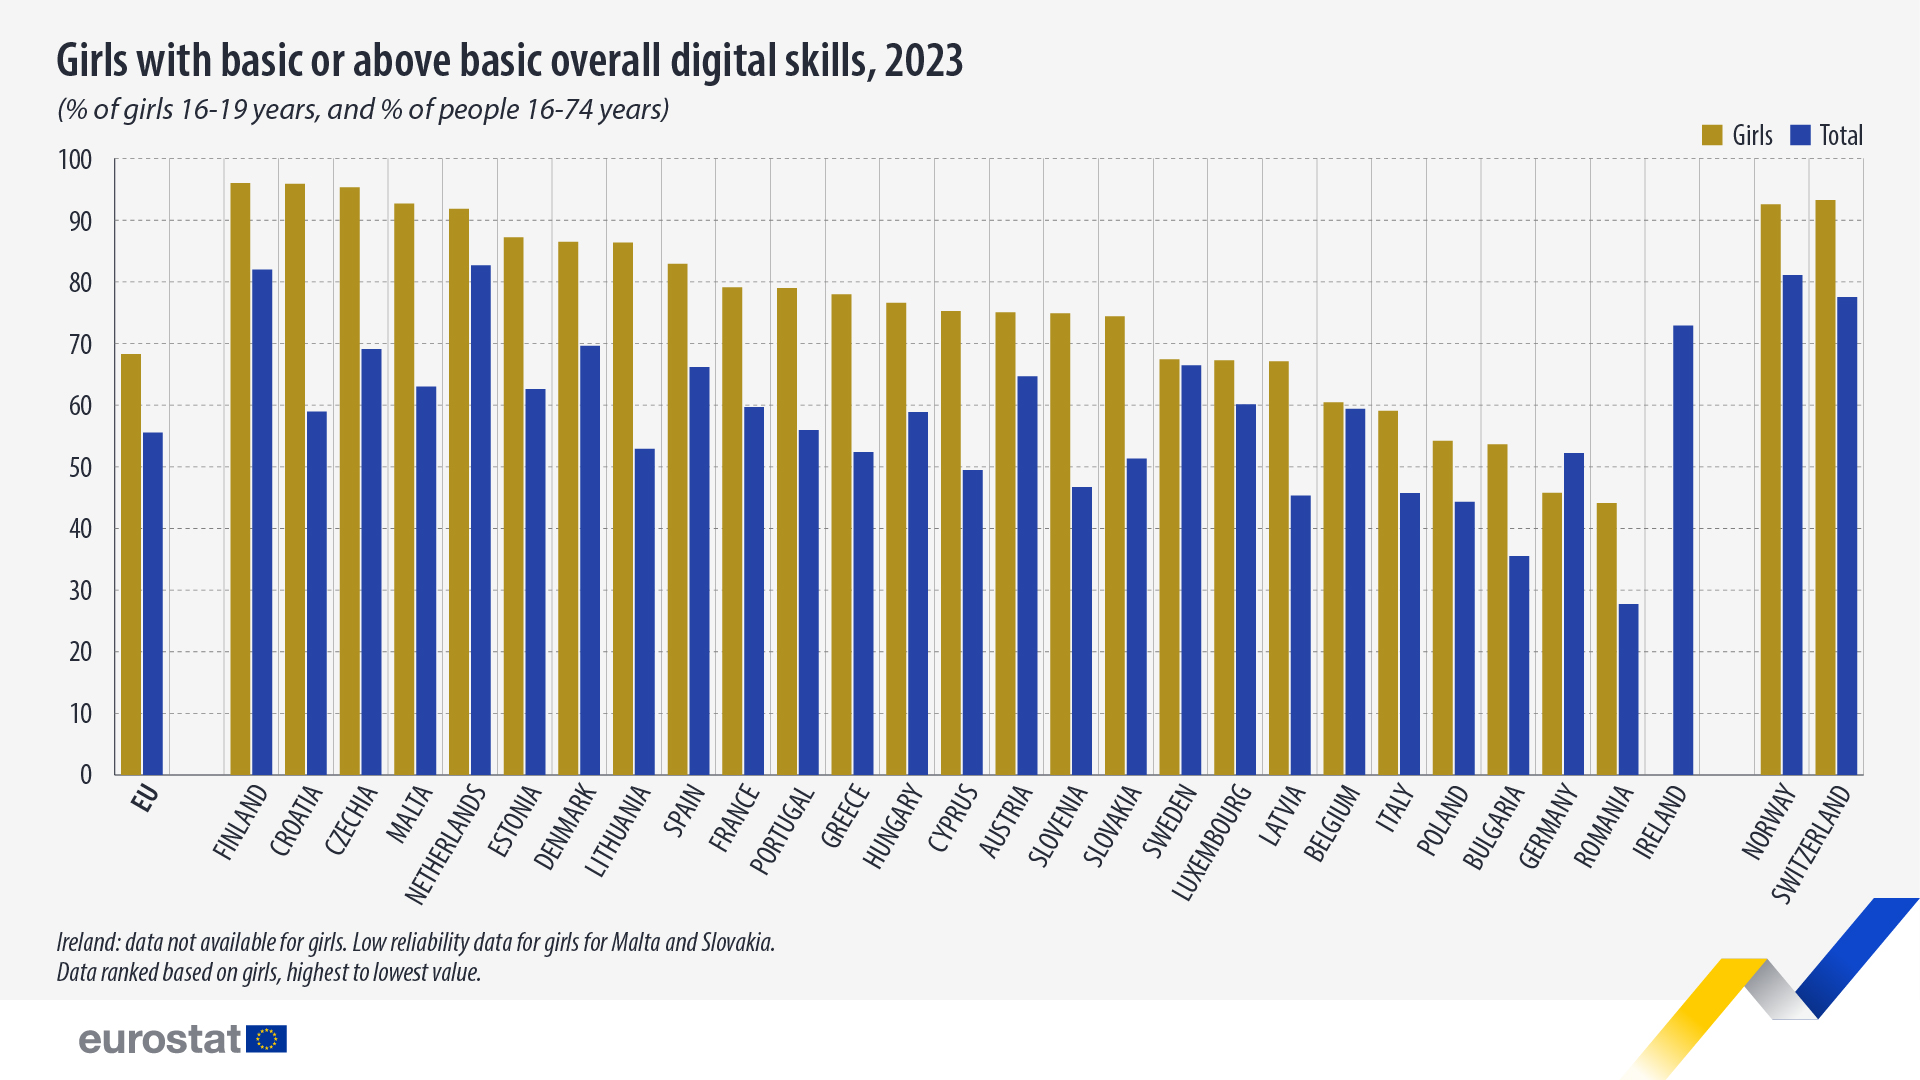 Girls with basic or above basic digital skills, 2023, % of girls 16-19 and % of people aged 16-74. Chart. See link to full dataset below.